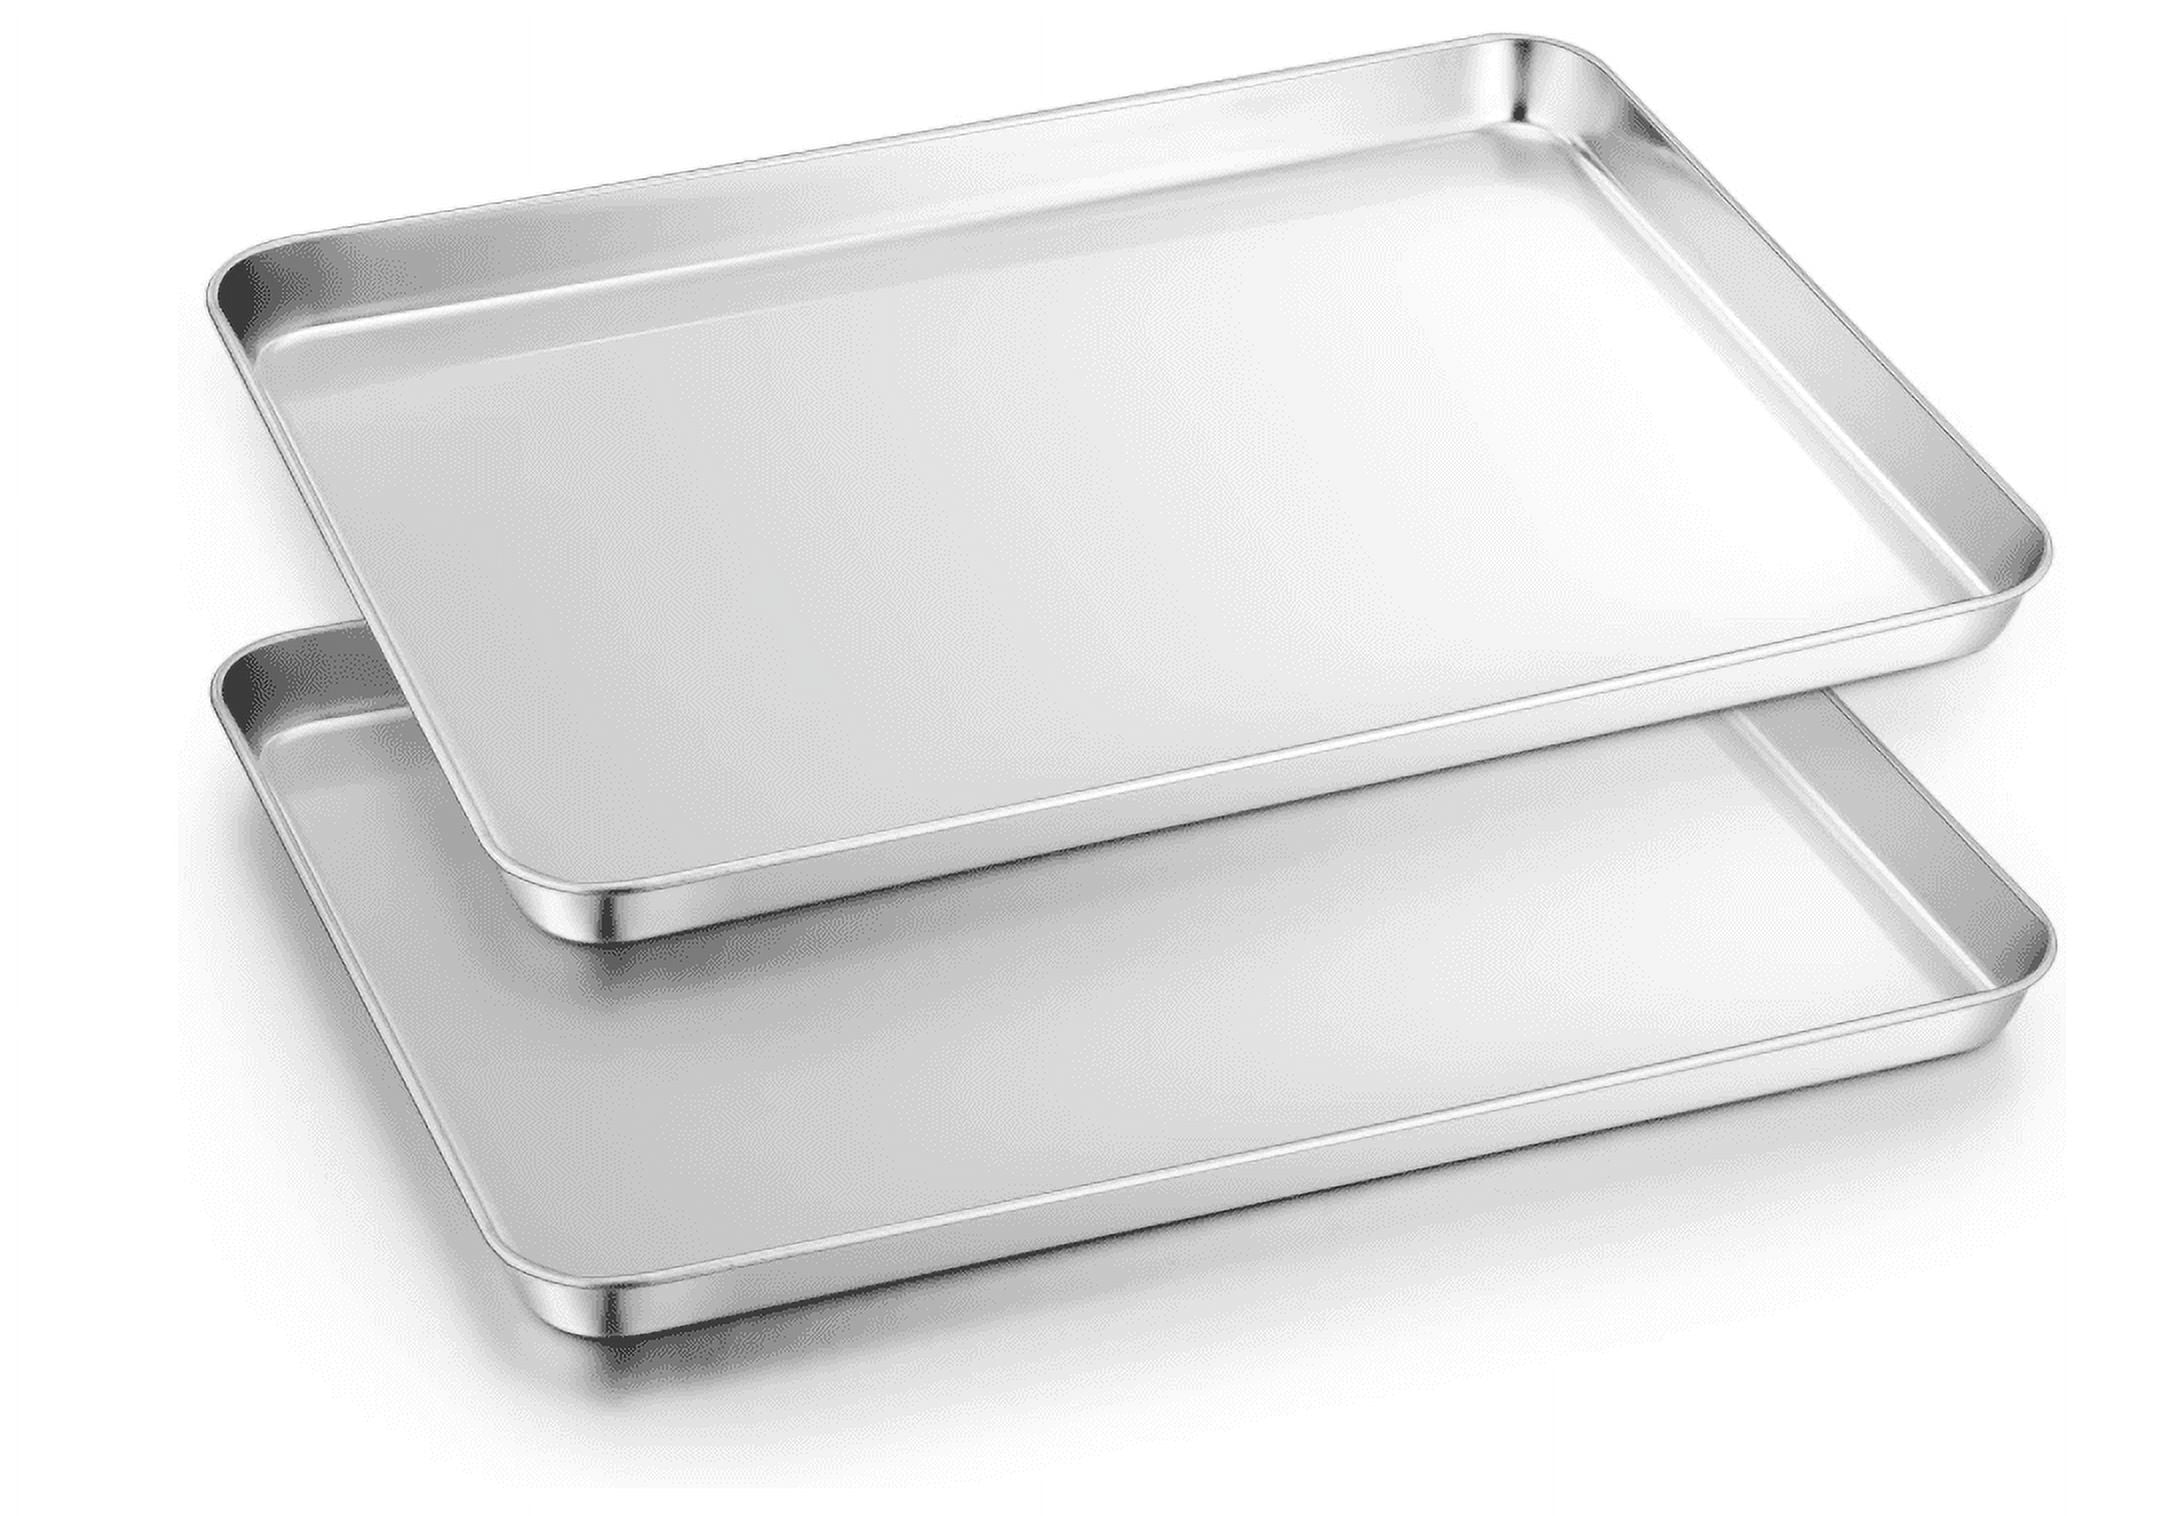 Baking Tray Set of 1, Stainless Steel Oven Tray– Large Cookie Sheet Pan for Baking  Cooking Serving - 40 x 30 x 2.5 cm, Healthy & Non Toxic, Easy Clean &  Dishwasher Safe 